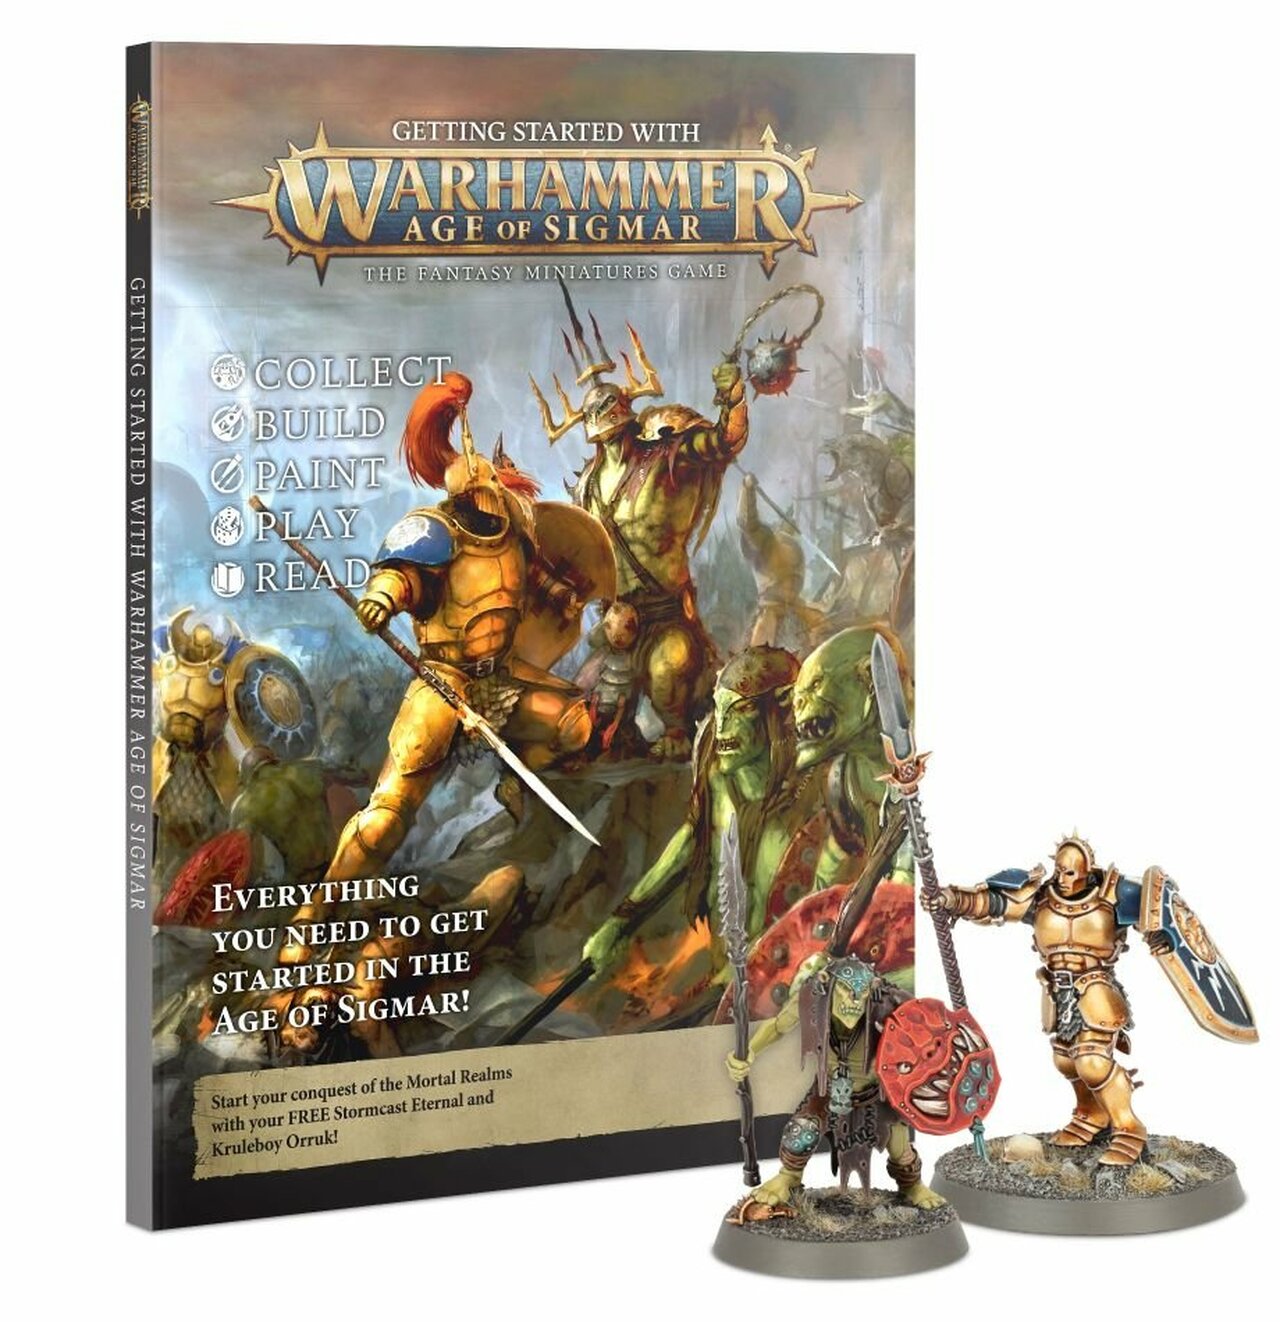 AOS - Age of Sigmar: Getting Started Magazine and Figures